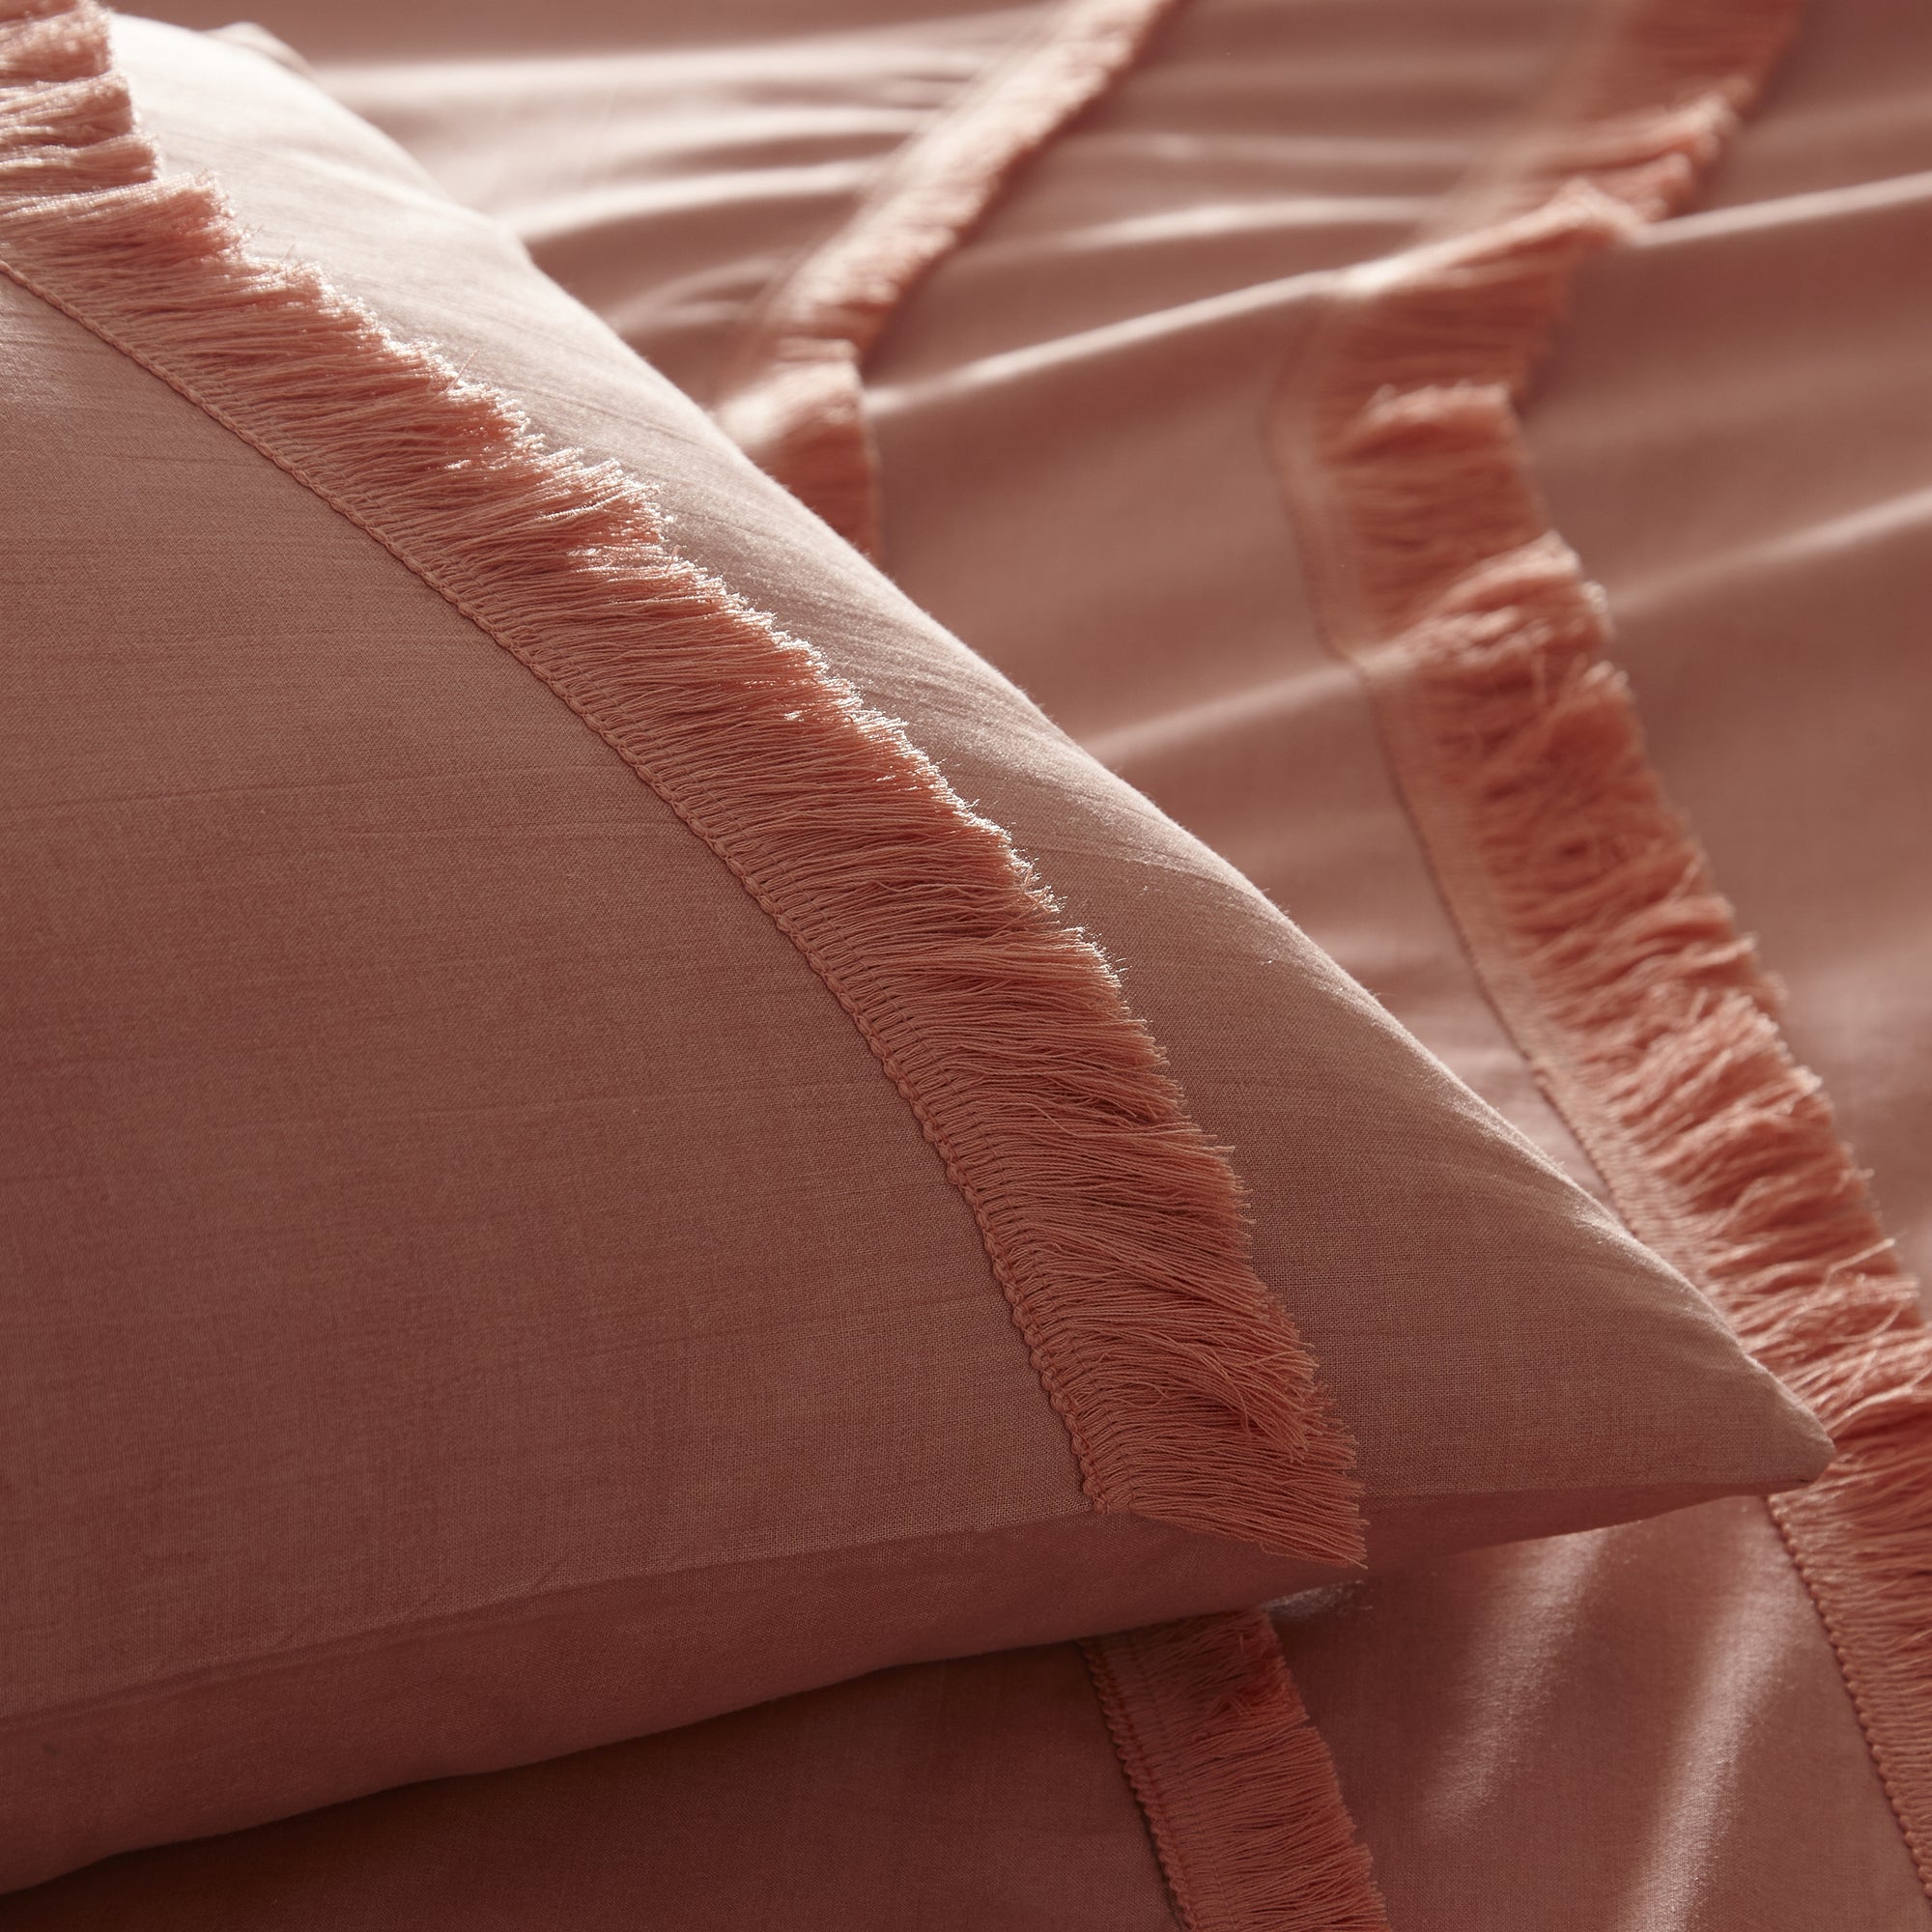 Tabitha - Tassel Relaxed Cotton Duvet Cover Set in Dark Coral - by Appletree Loft